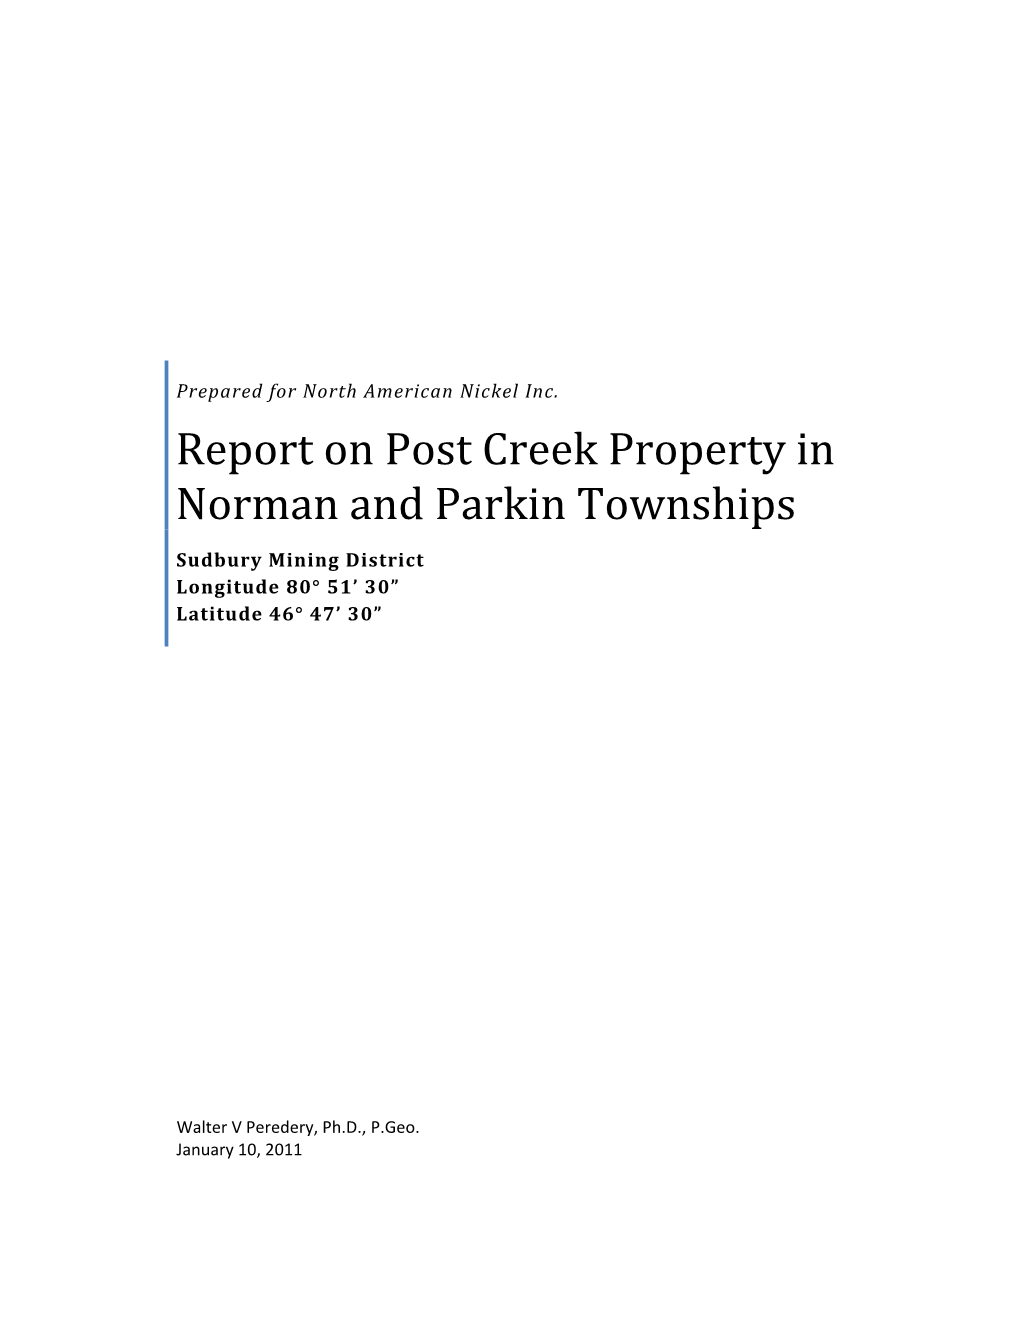 Report on Post Creek Property in Norman and Parkin Townships Sudbury Mining District Longitude 80° 51’ 30” Latitude 46° 47’ 30”